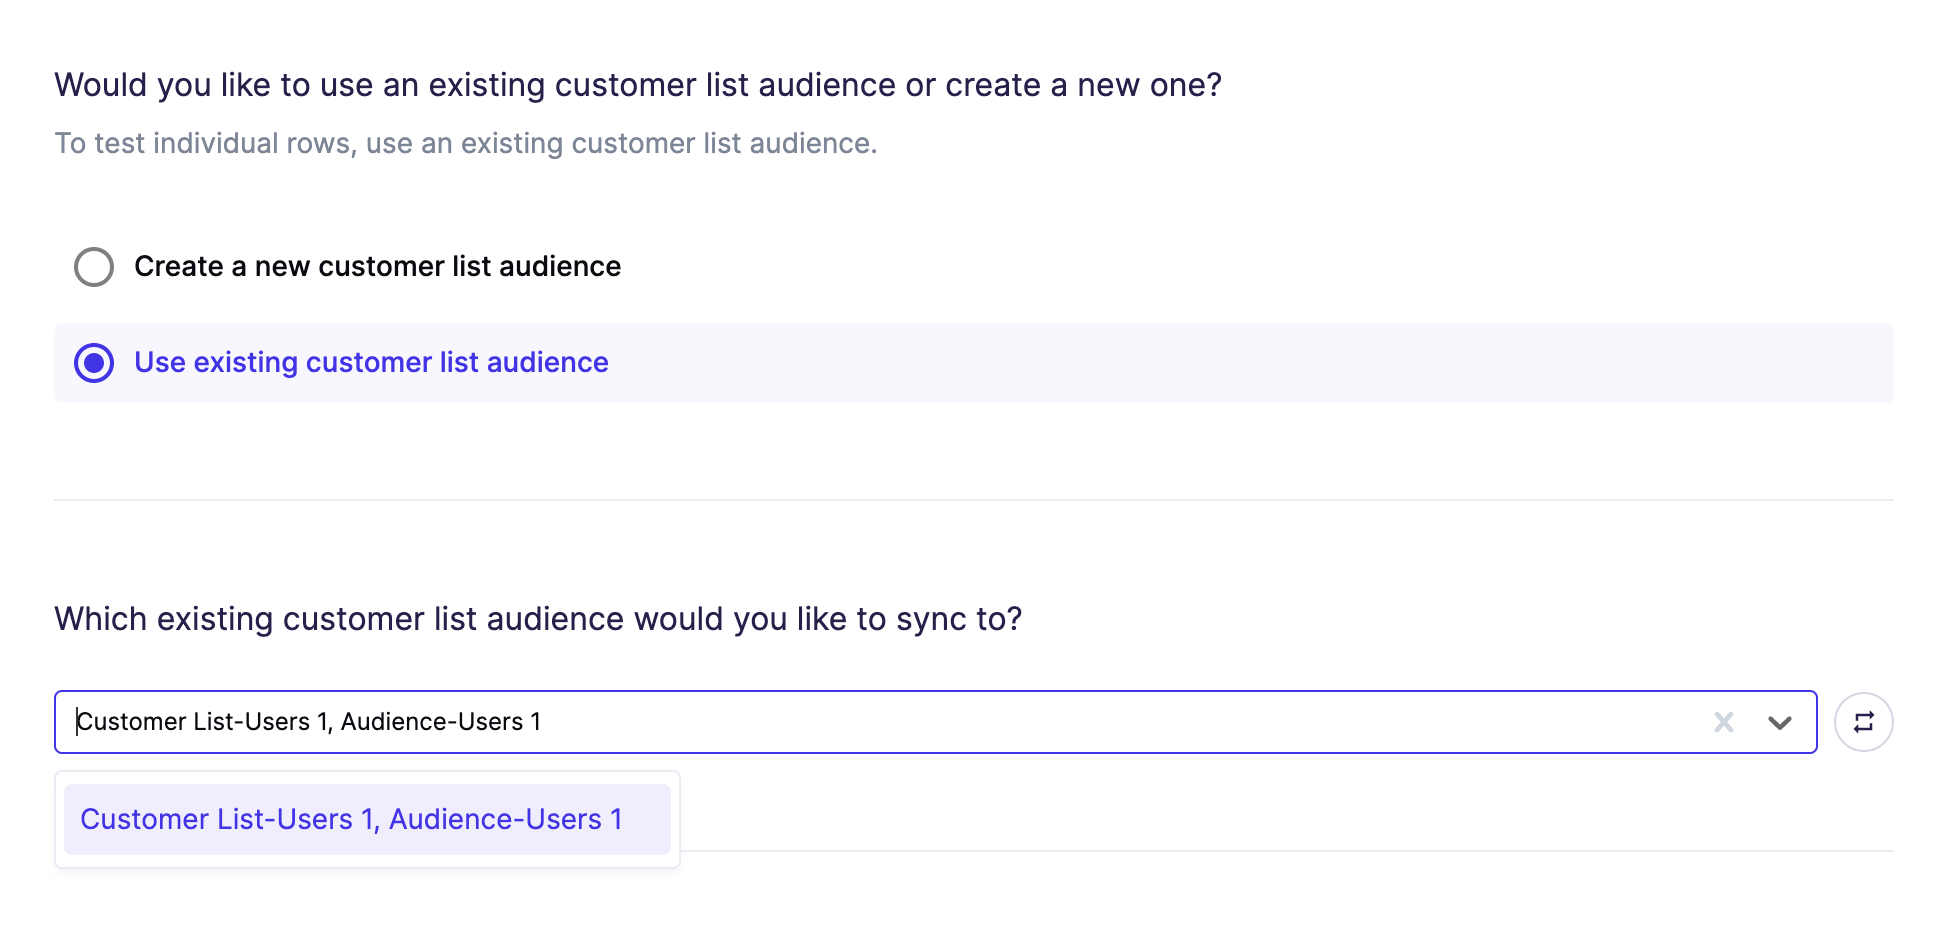 Using an existing customer list audience